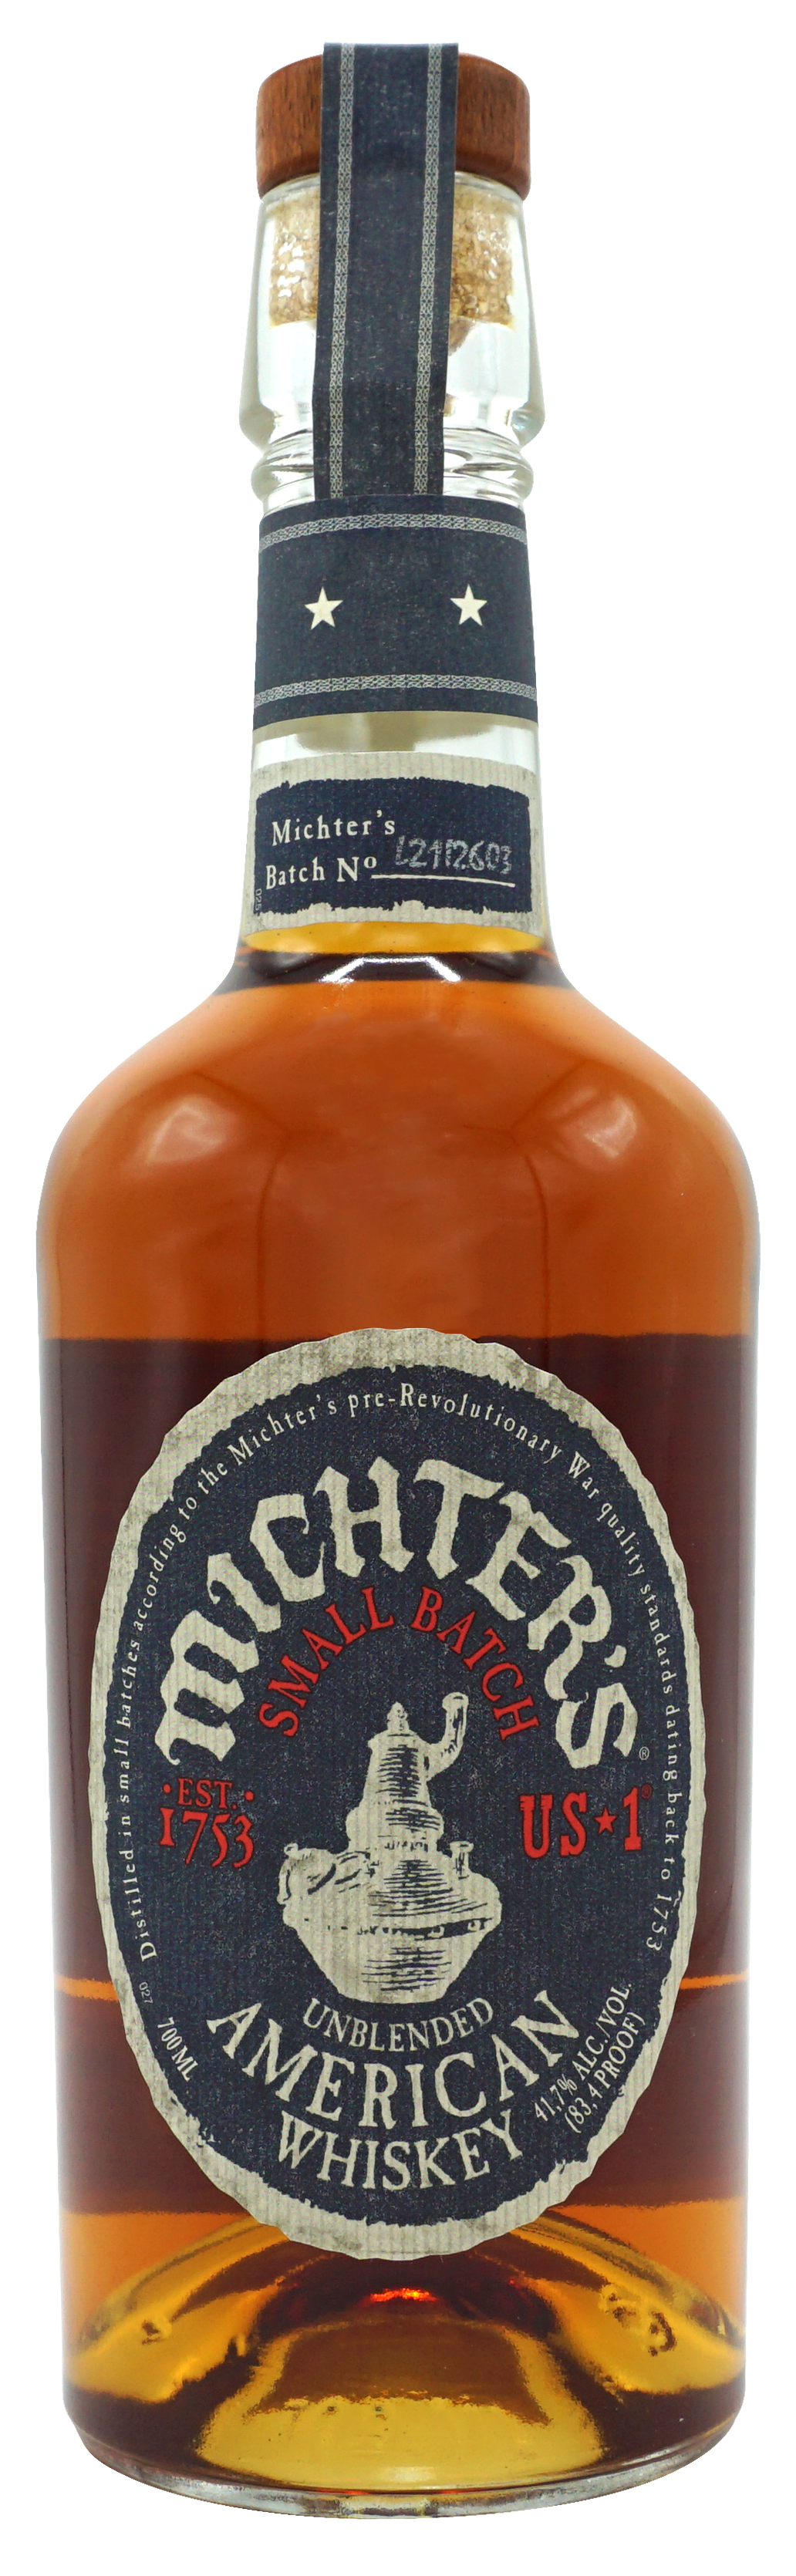 Michters American Whiskey 417